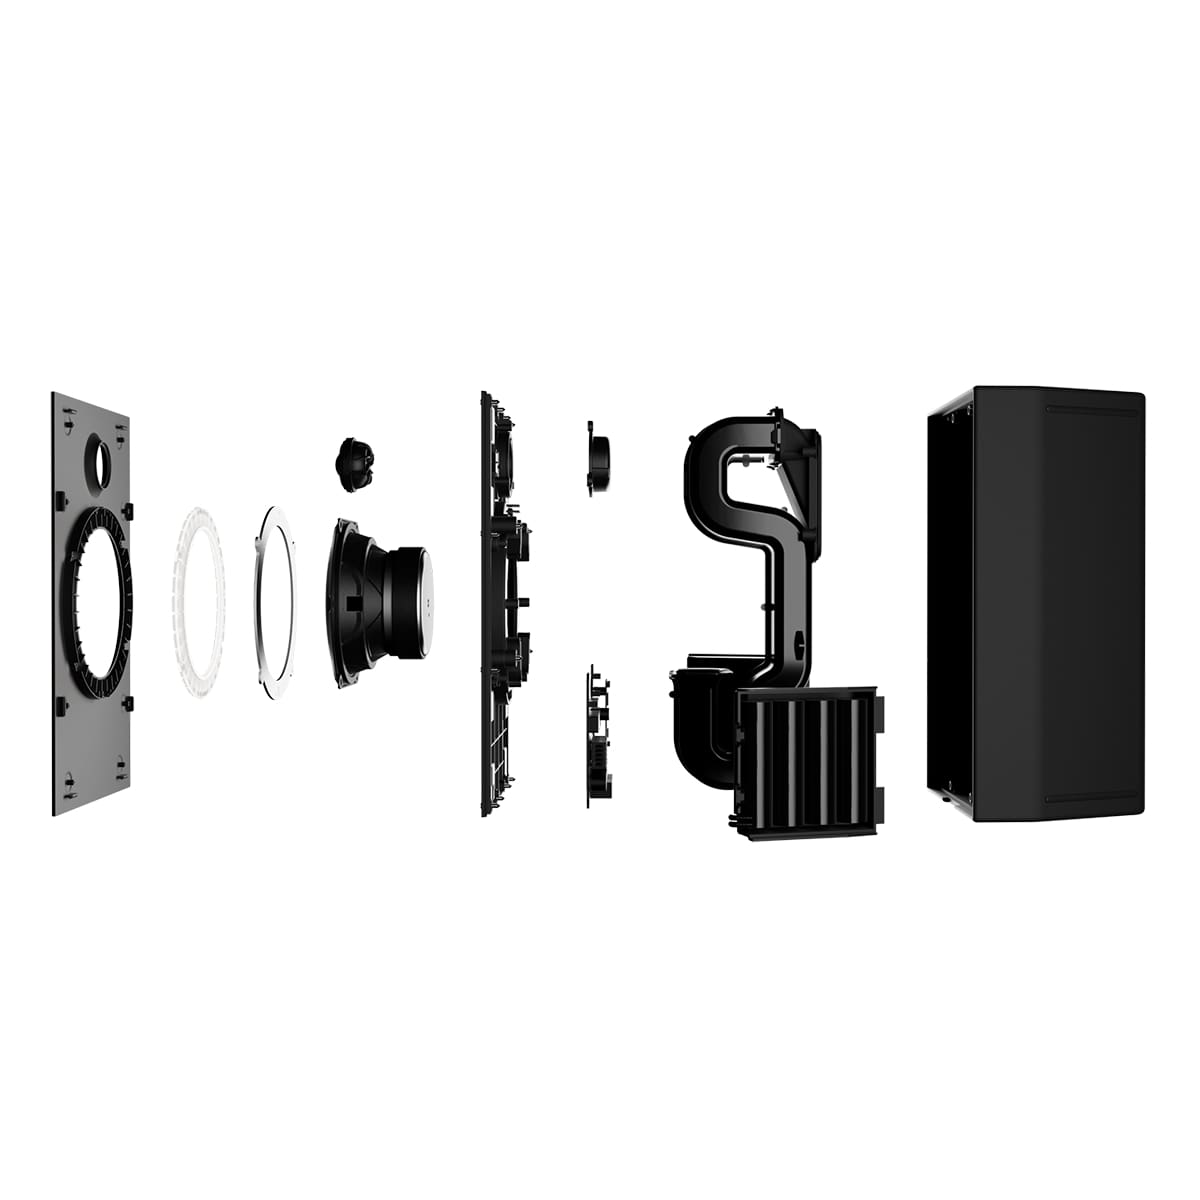 Aiaiai Unit-4 Wireless+ - Accessoires Divers Claviers & Synthes - Variation 7